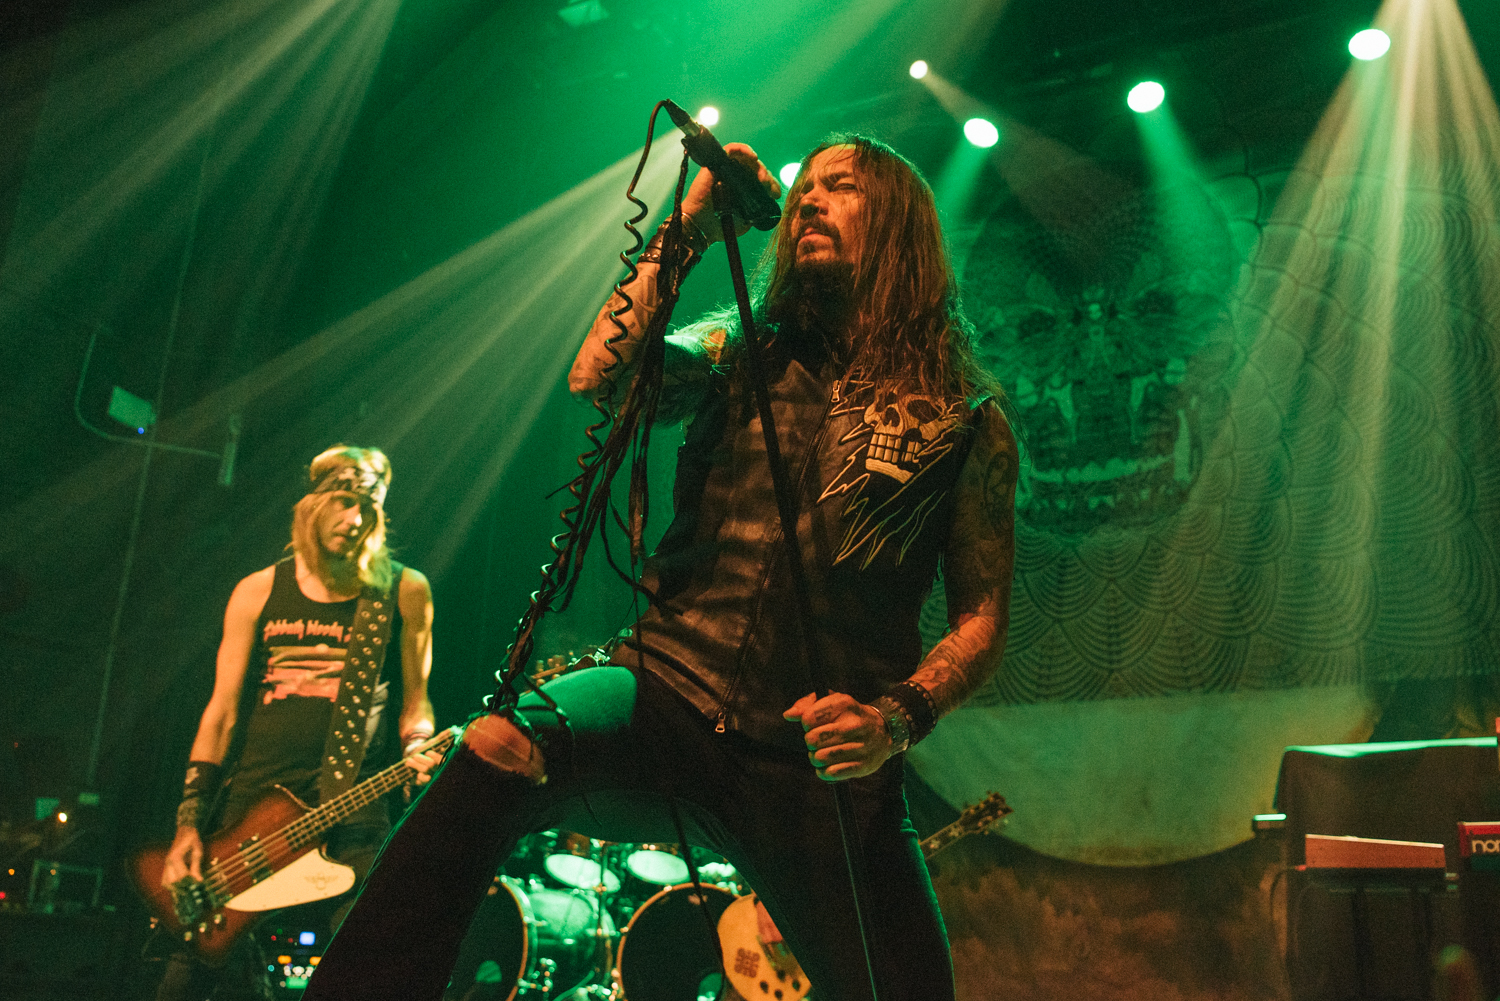 PHOTO SET: Amorphis: Live at The Gramercy Theatre - Ghost Cult